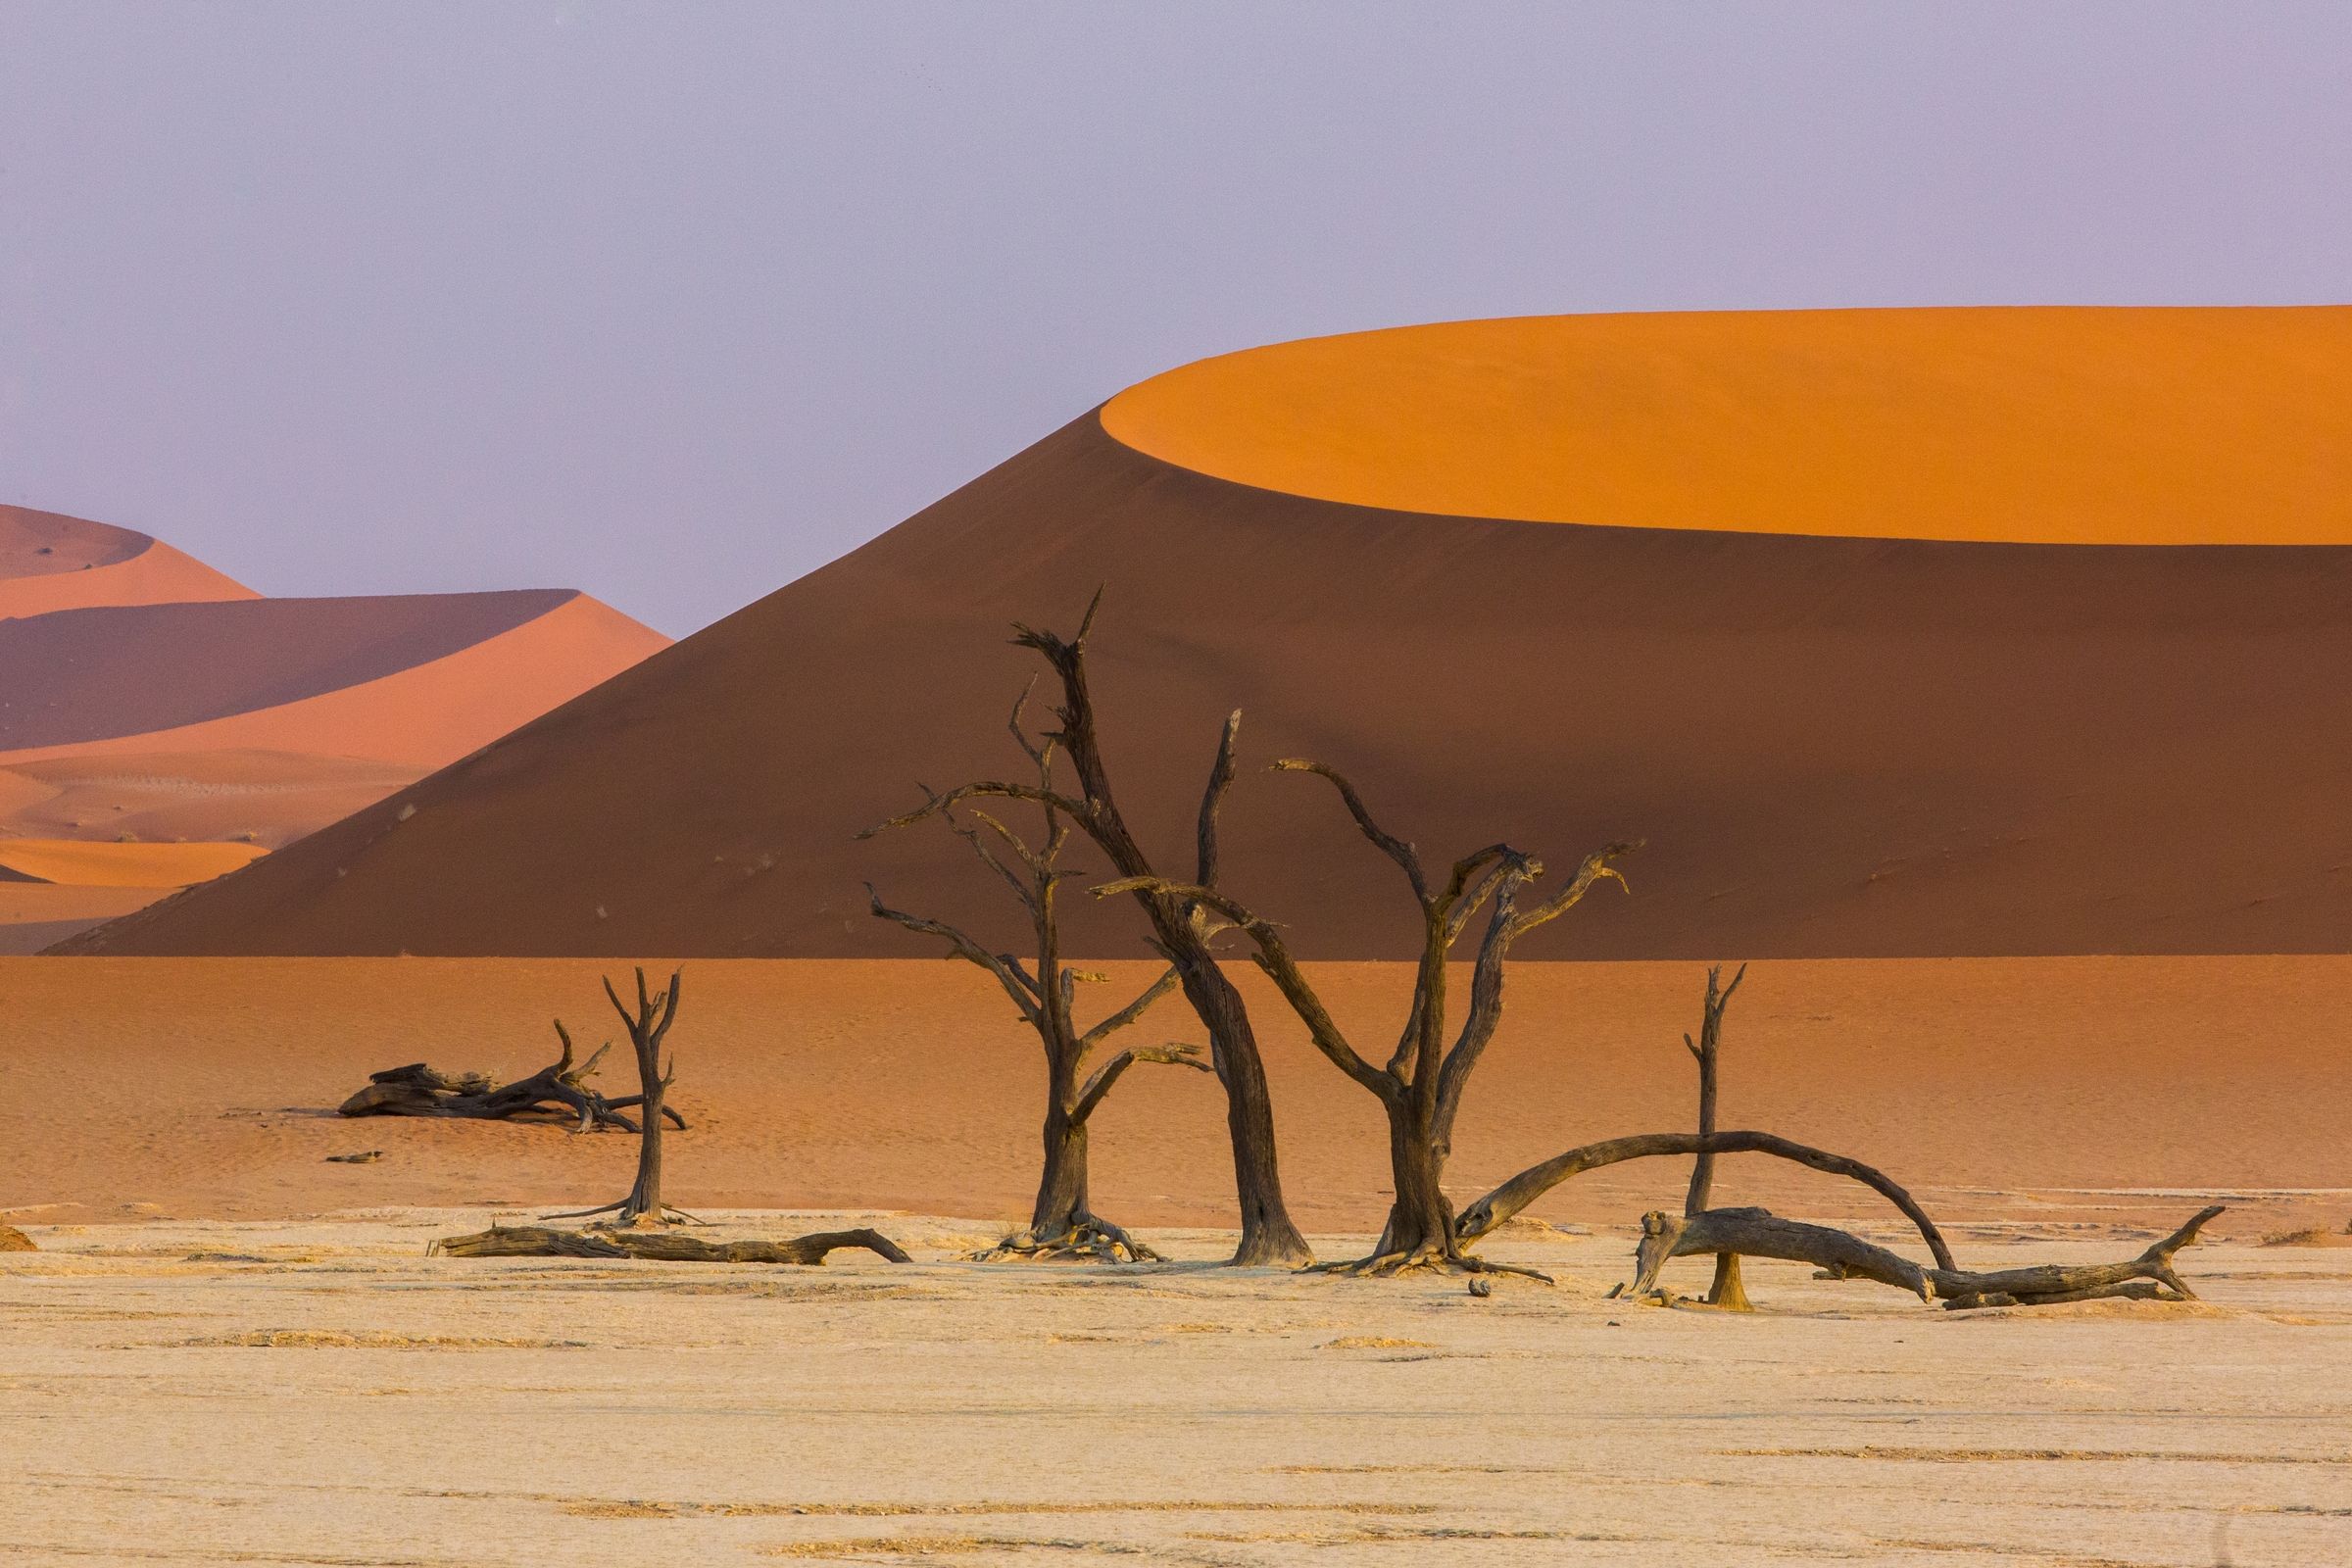 Namibia's iconic Deadvlei is a paradise for landscape photographers